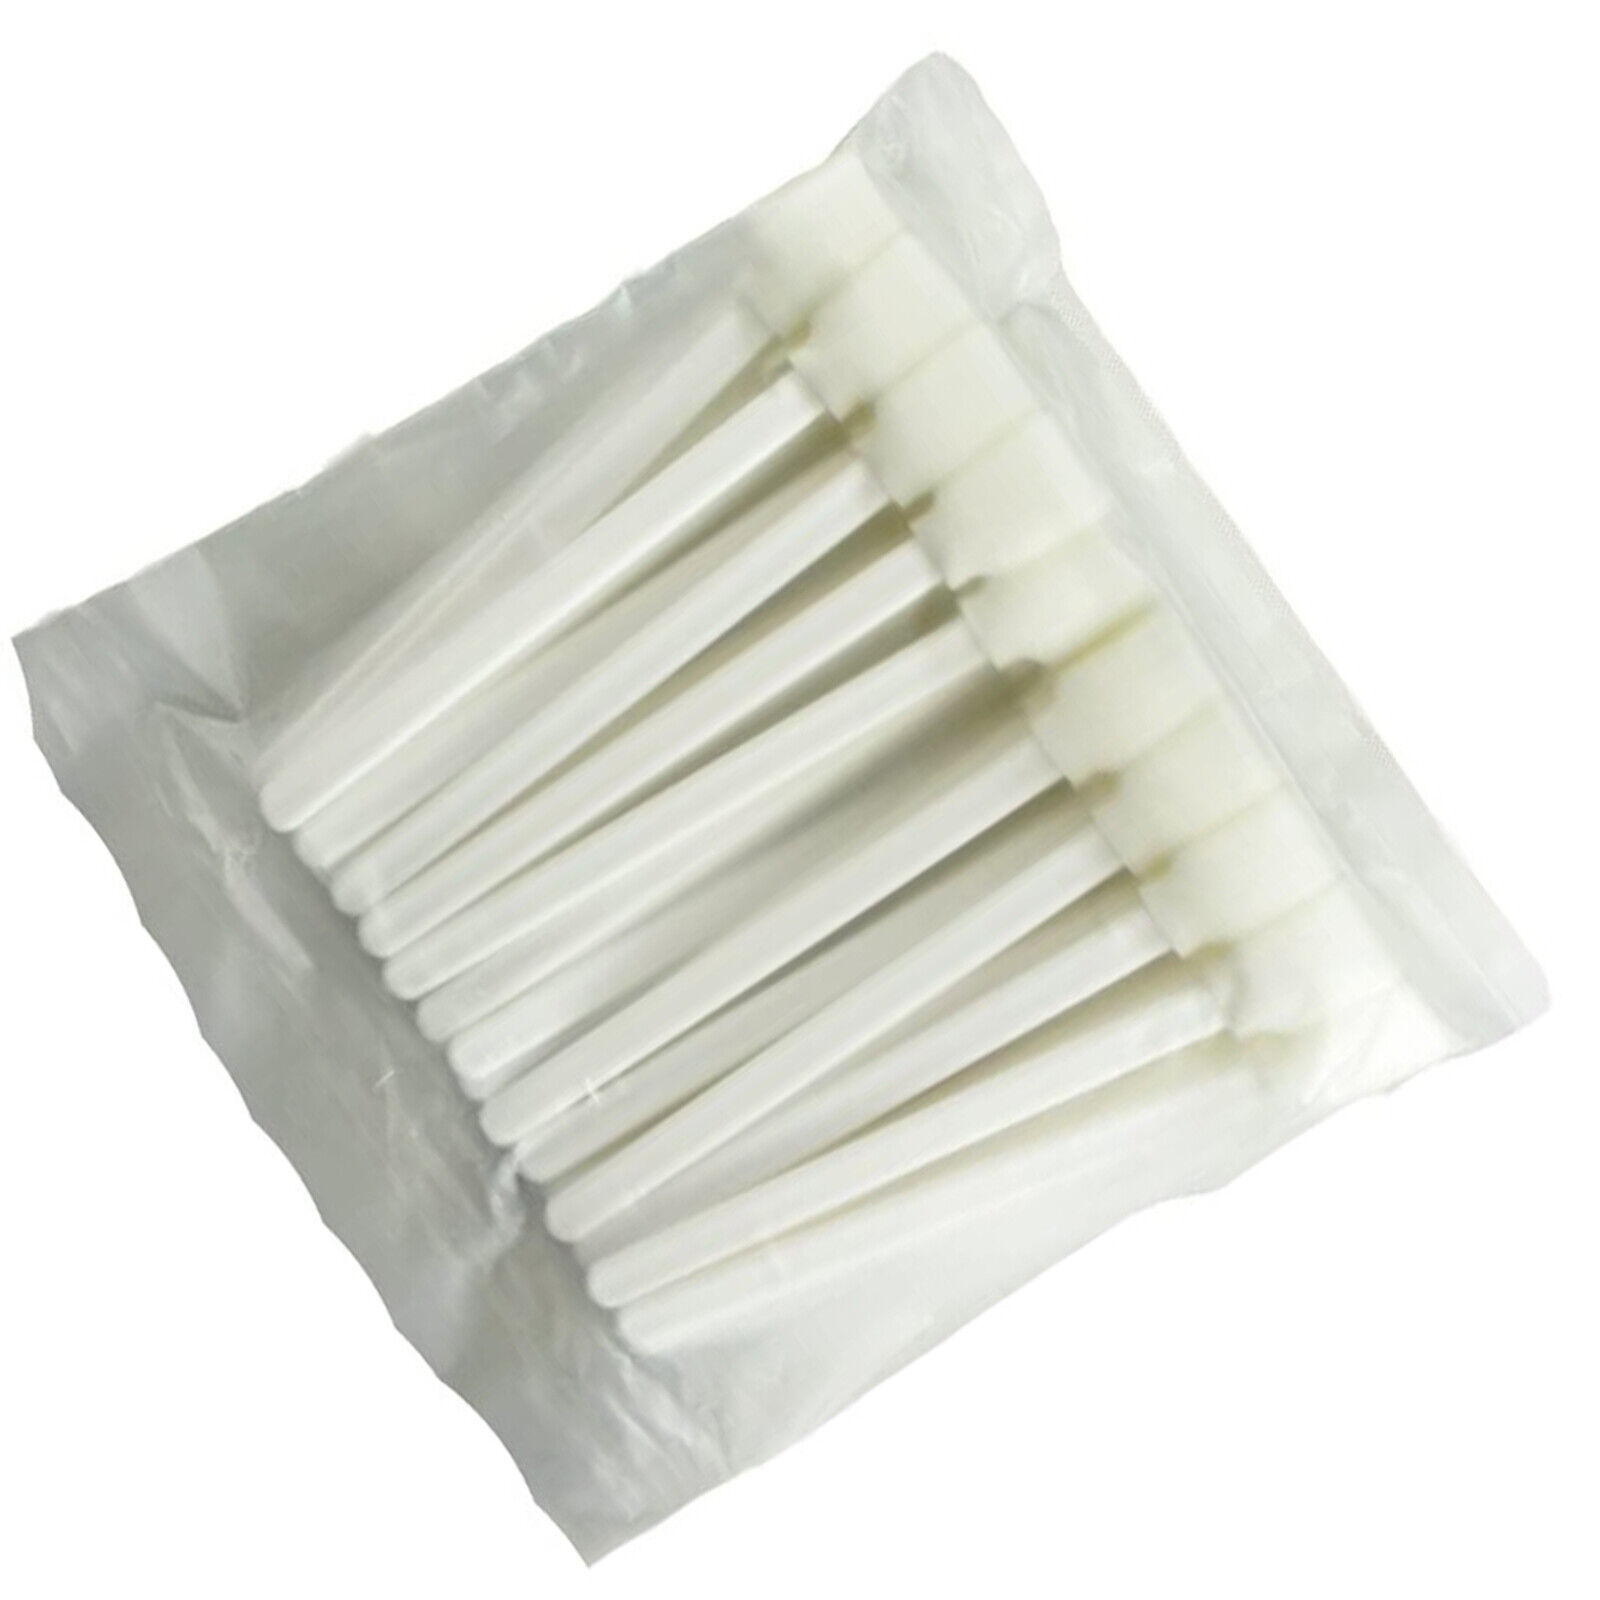 50x Cleaning Swabs Foam Tipped Stick For Roland Mimaki Mutoh Epson Printer